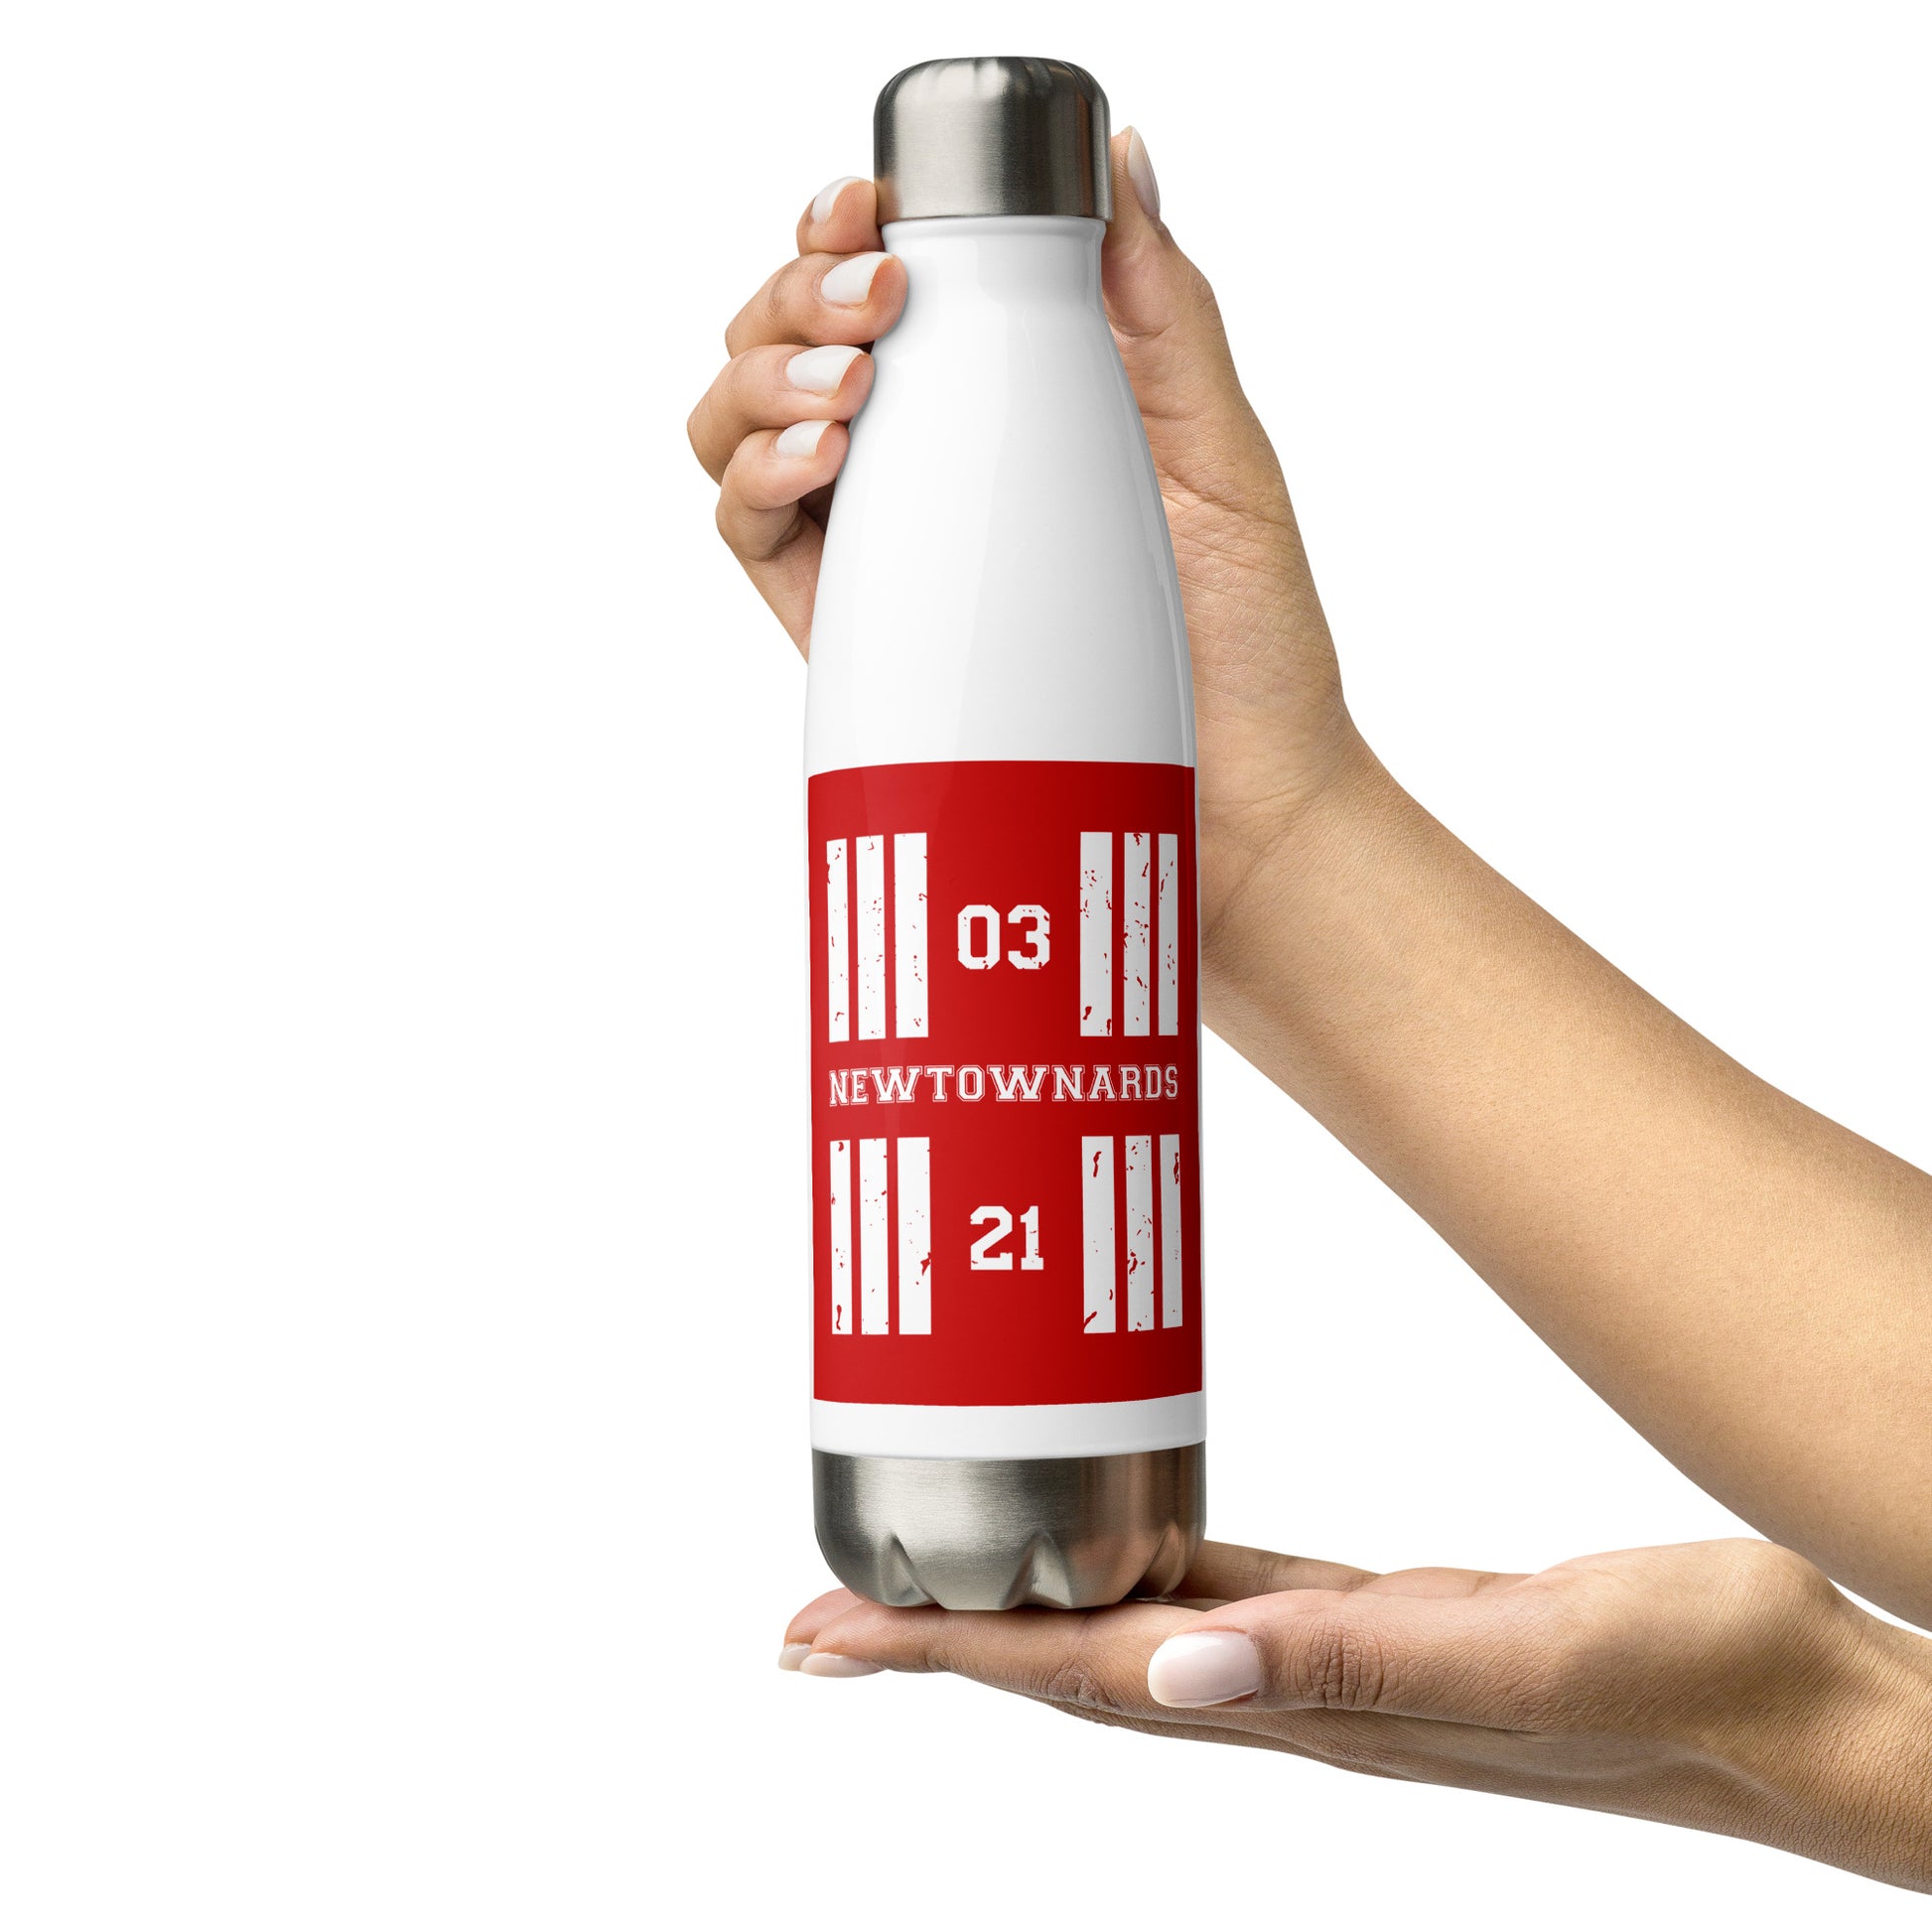 The Newtownards Airport runway designator water bottle features a red print with the airport's name and designator framed by stylised threshold markings showing through.